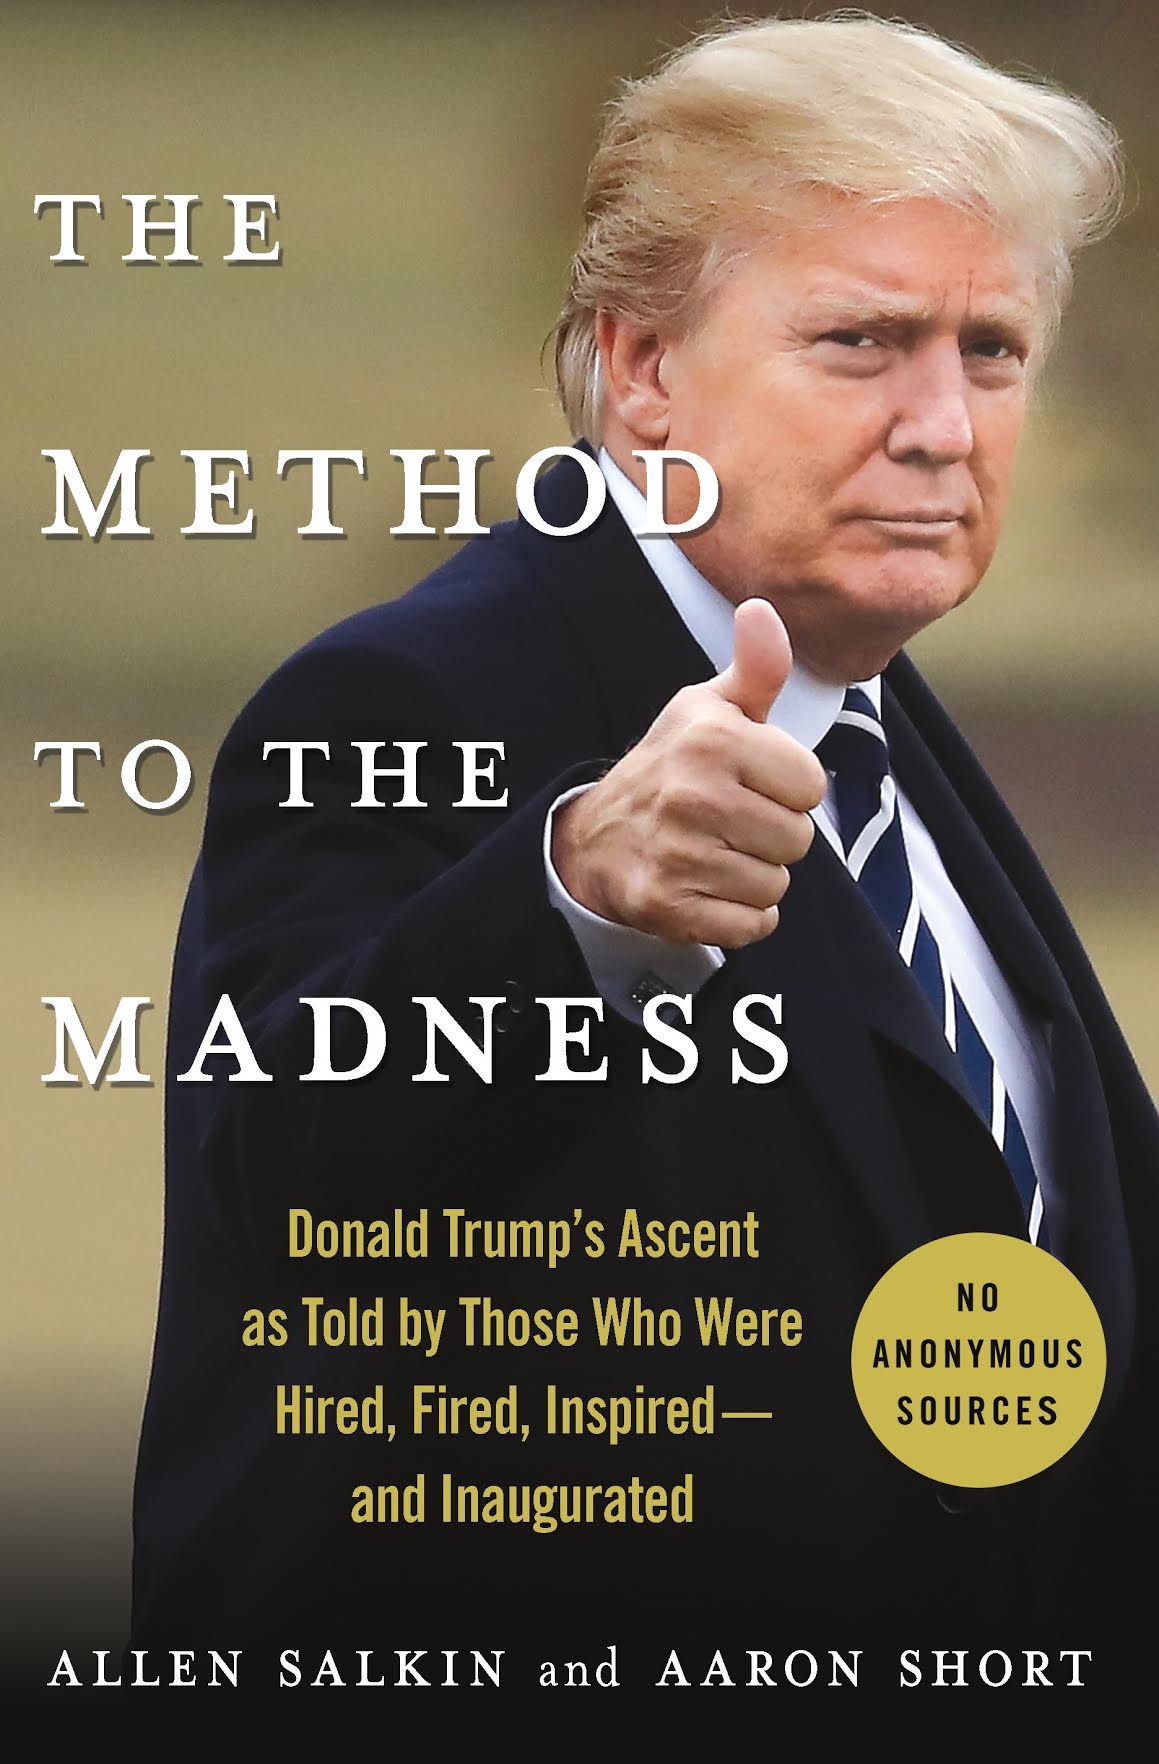 Book Launch: The Method To The Madness by Allen Salkin and Aaron Short with a panel featuring Sam Nunberg, Jessica Proud, Surya Yalamanchili and Dick Morris